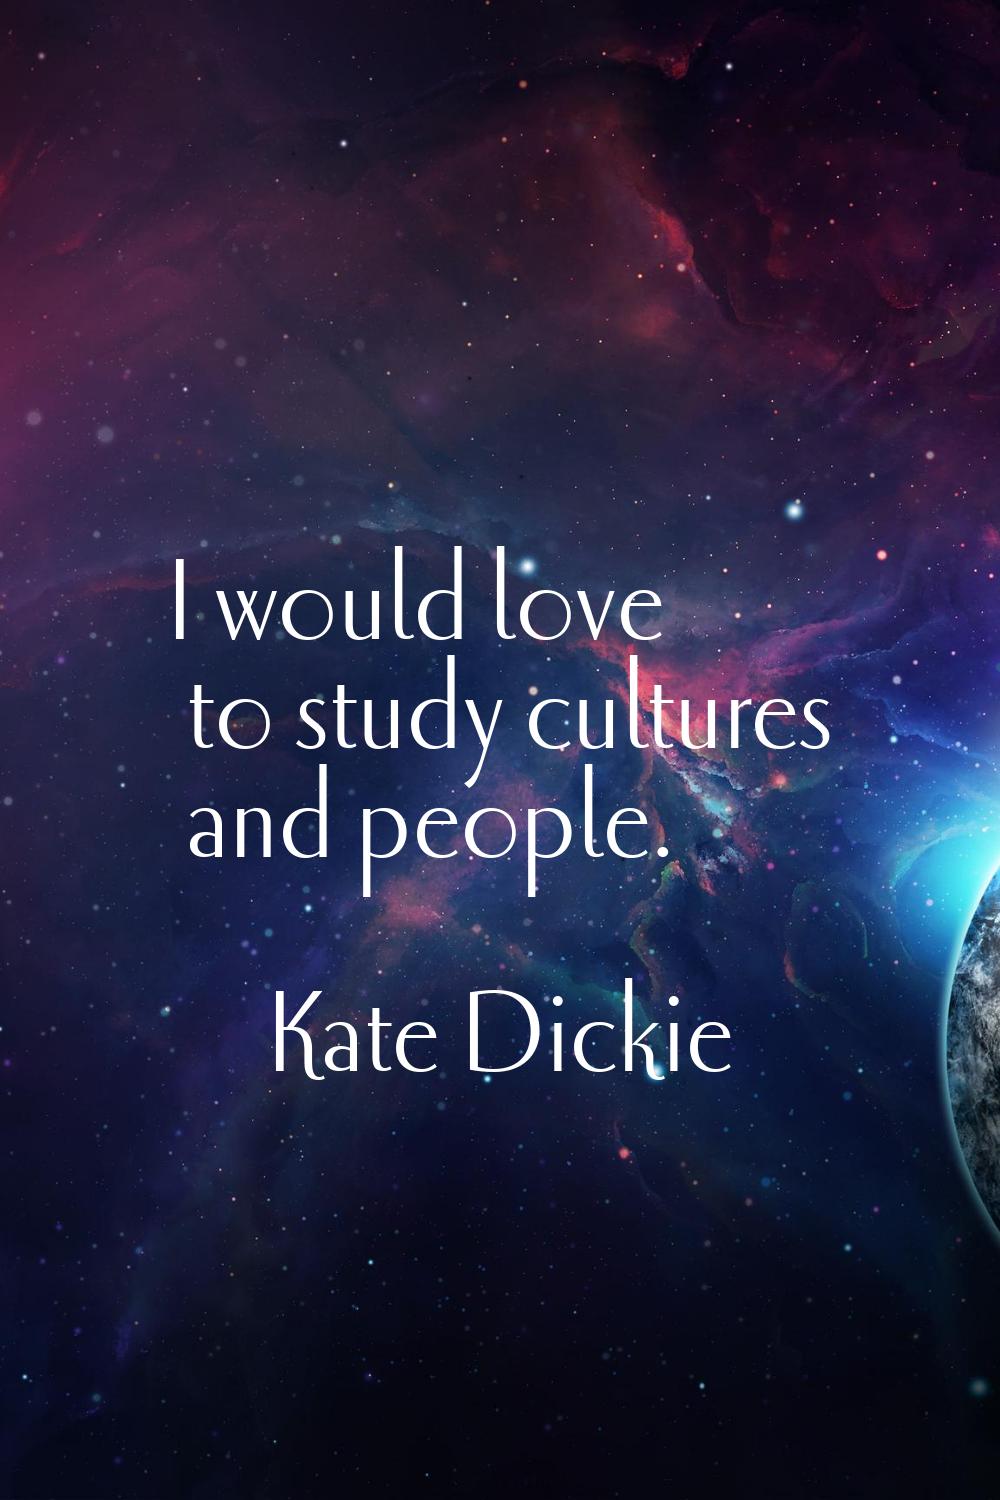 I would love to study cultures and people.